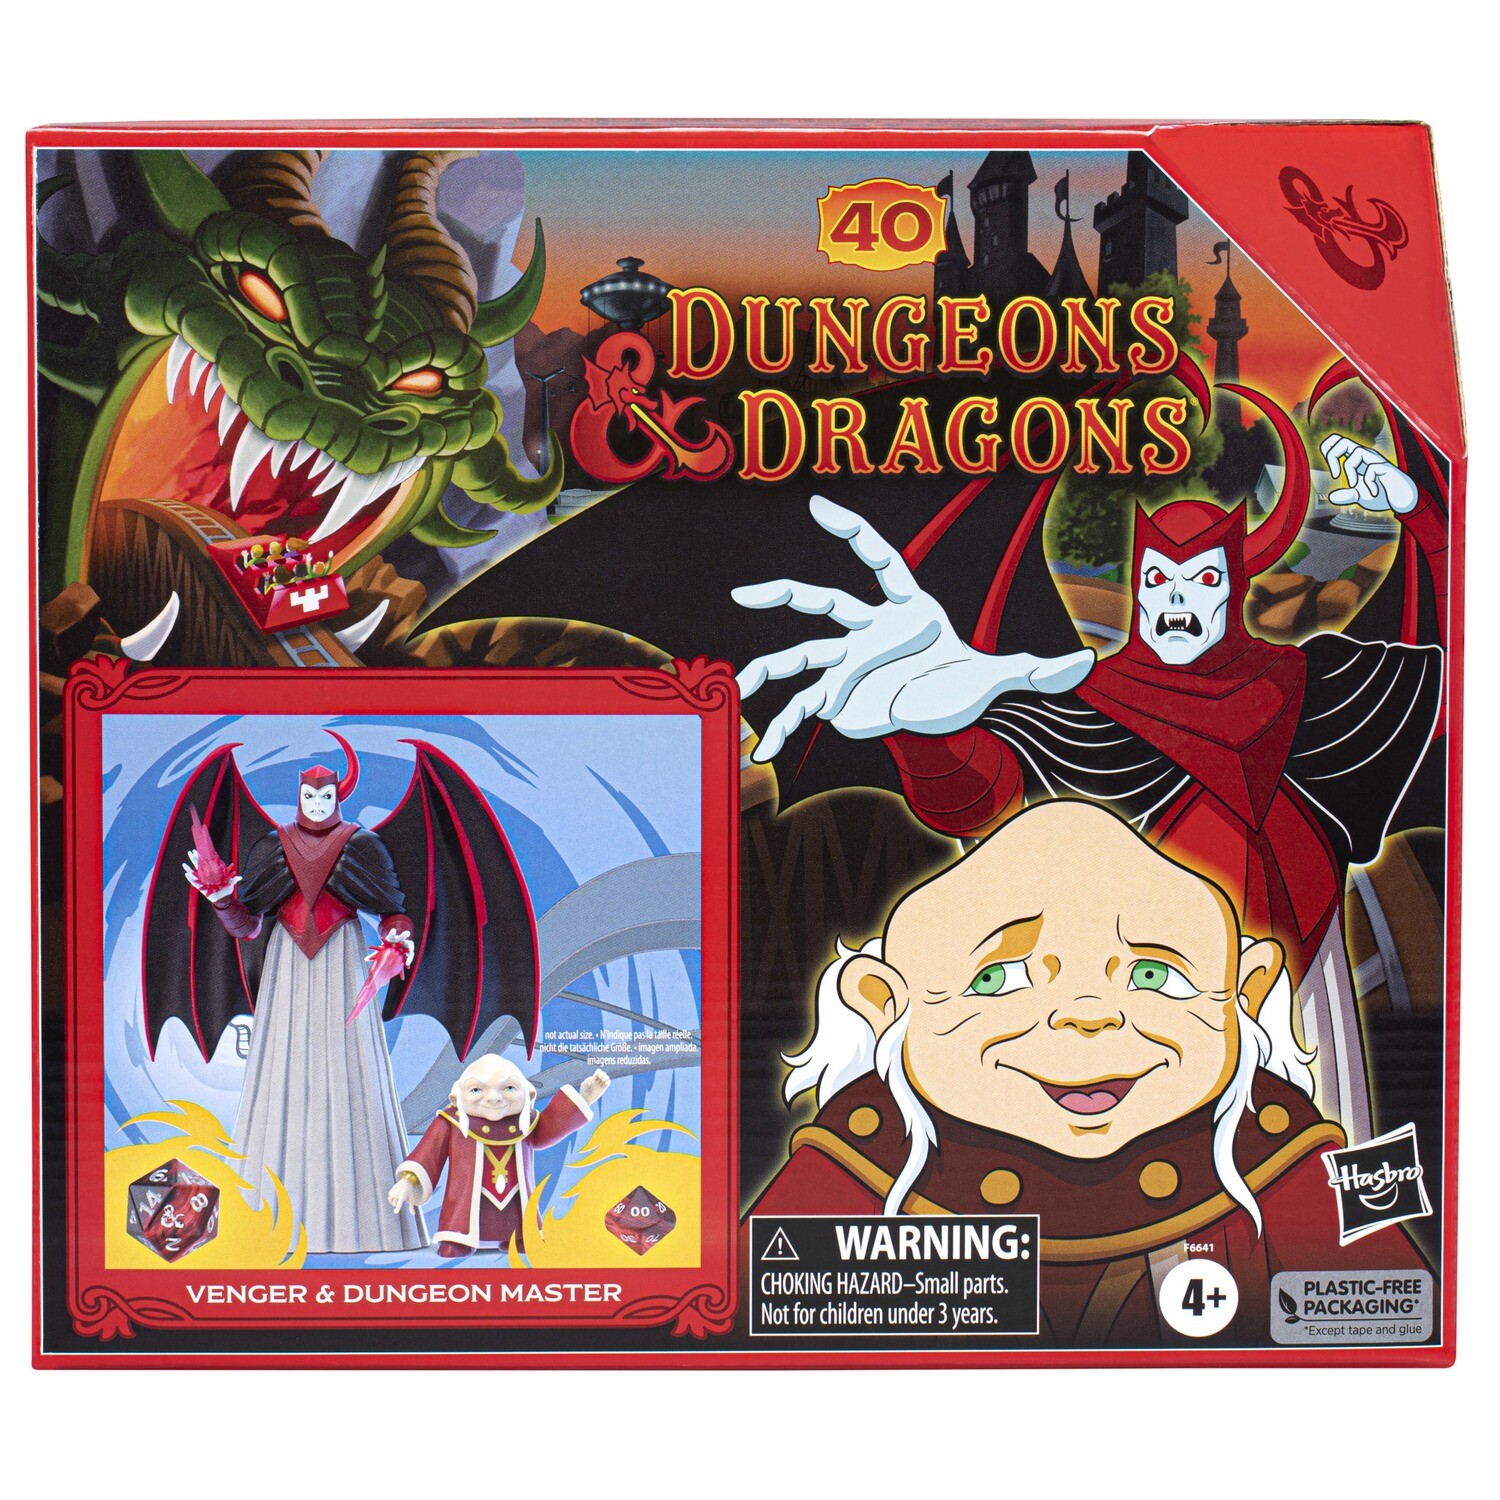 Dungeons and Dragons Cartoon Venger and Dungeon Master Box Set